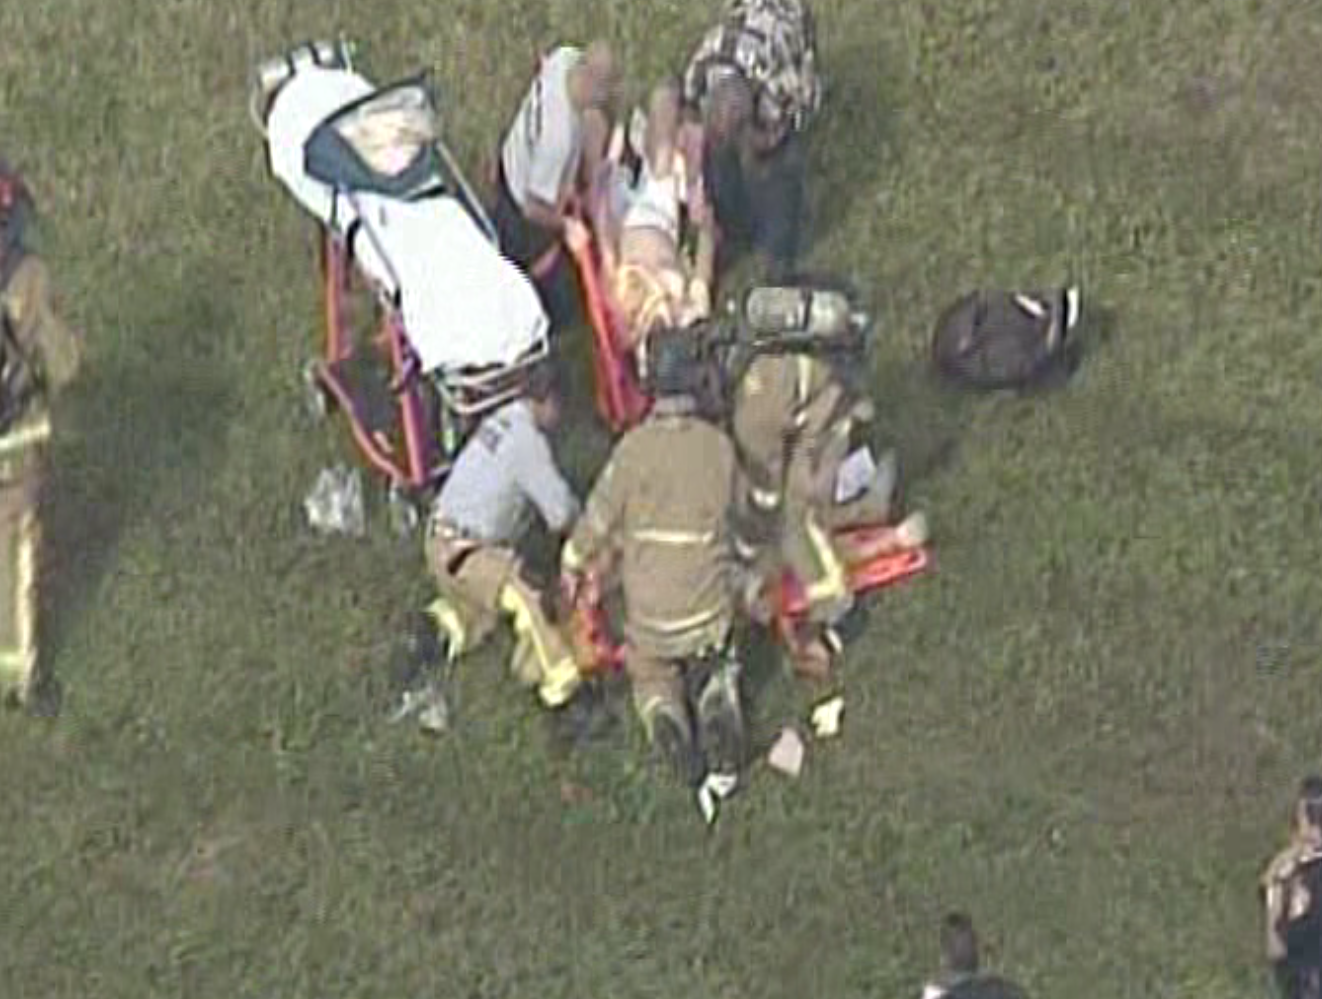 A plane went down in Opa Locka, injuring a number of people on Dec. 1, 2015. Miami-Dade Fire Rescue crews could be seen treating two patients. (Source: CBS4) 